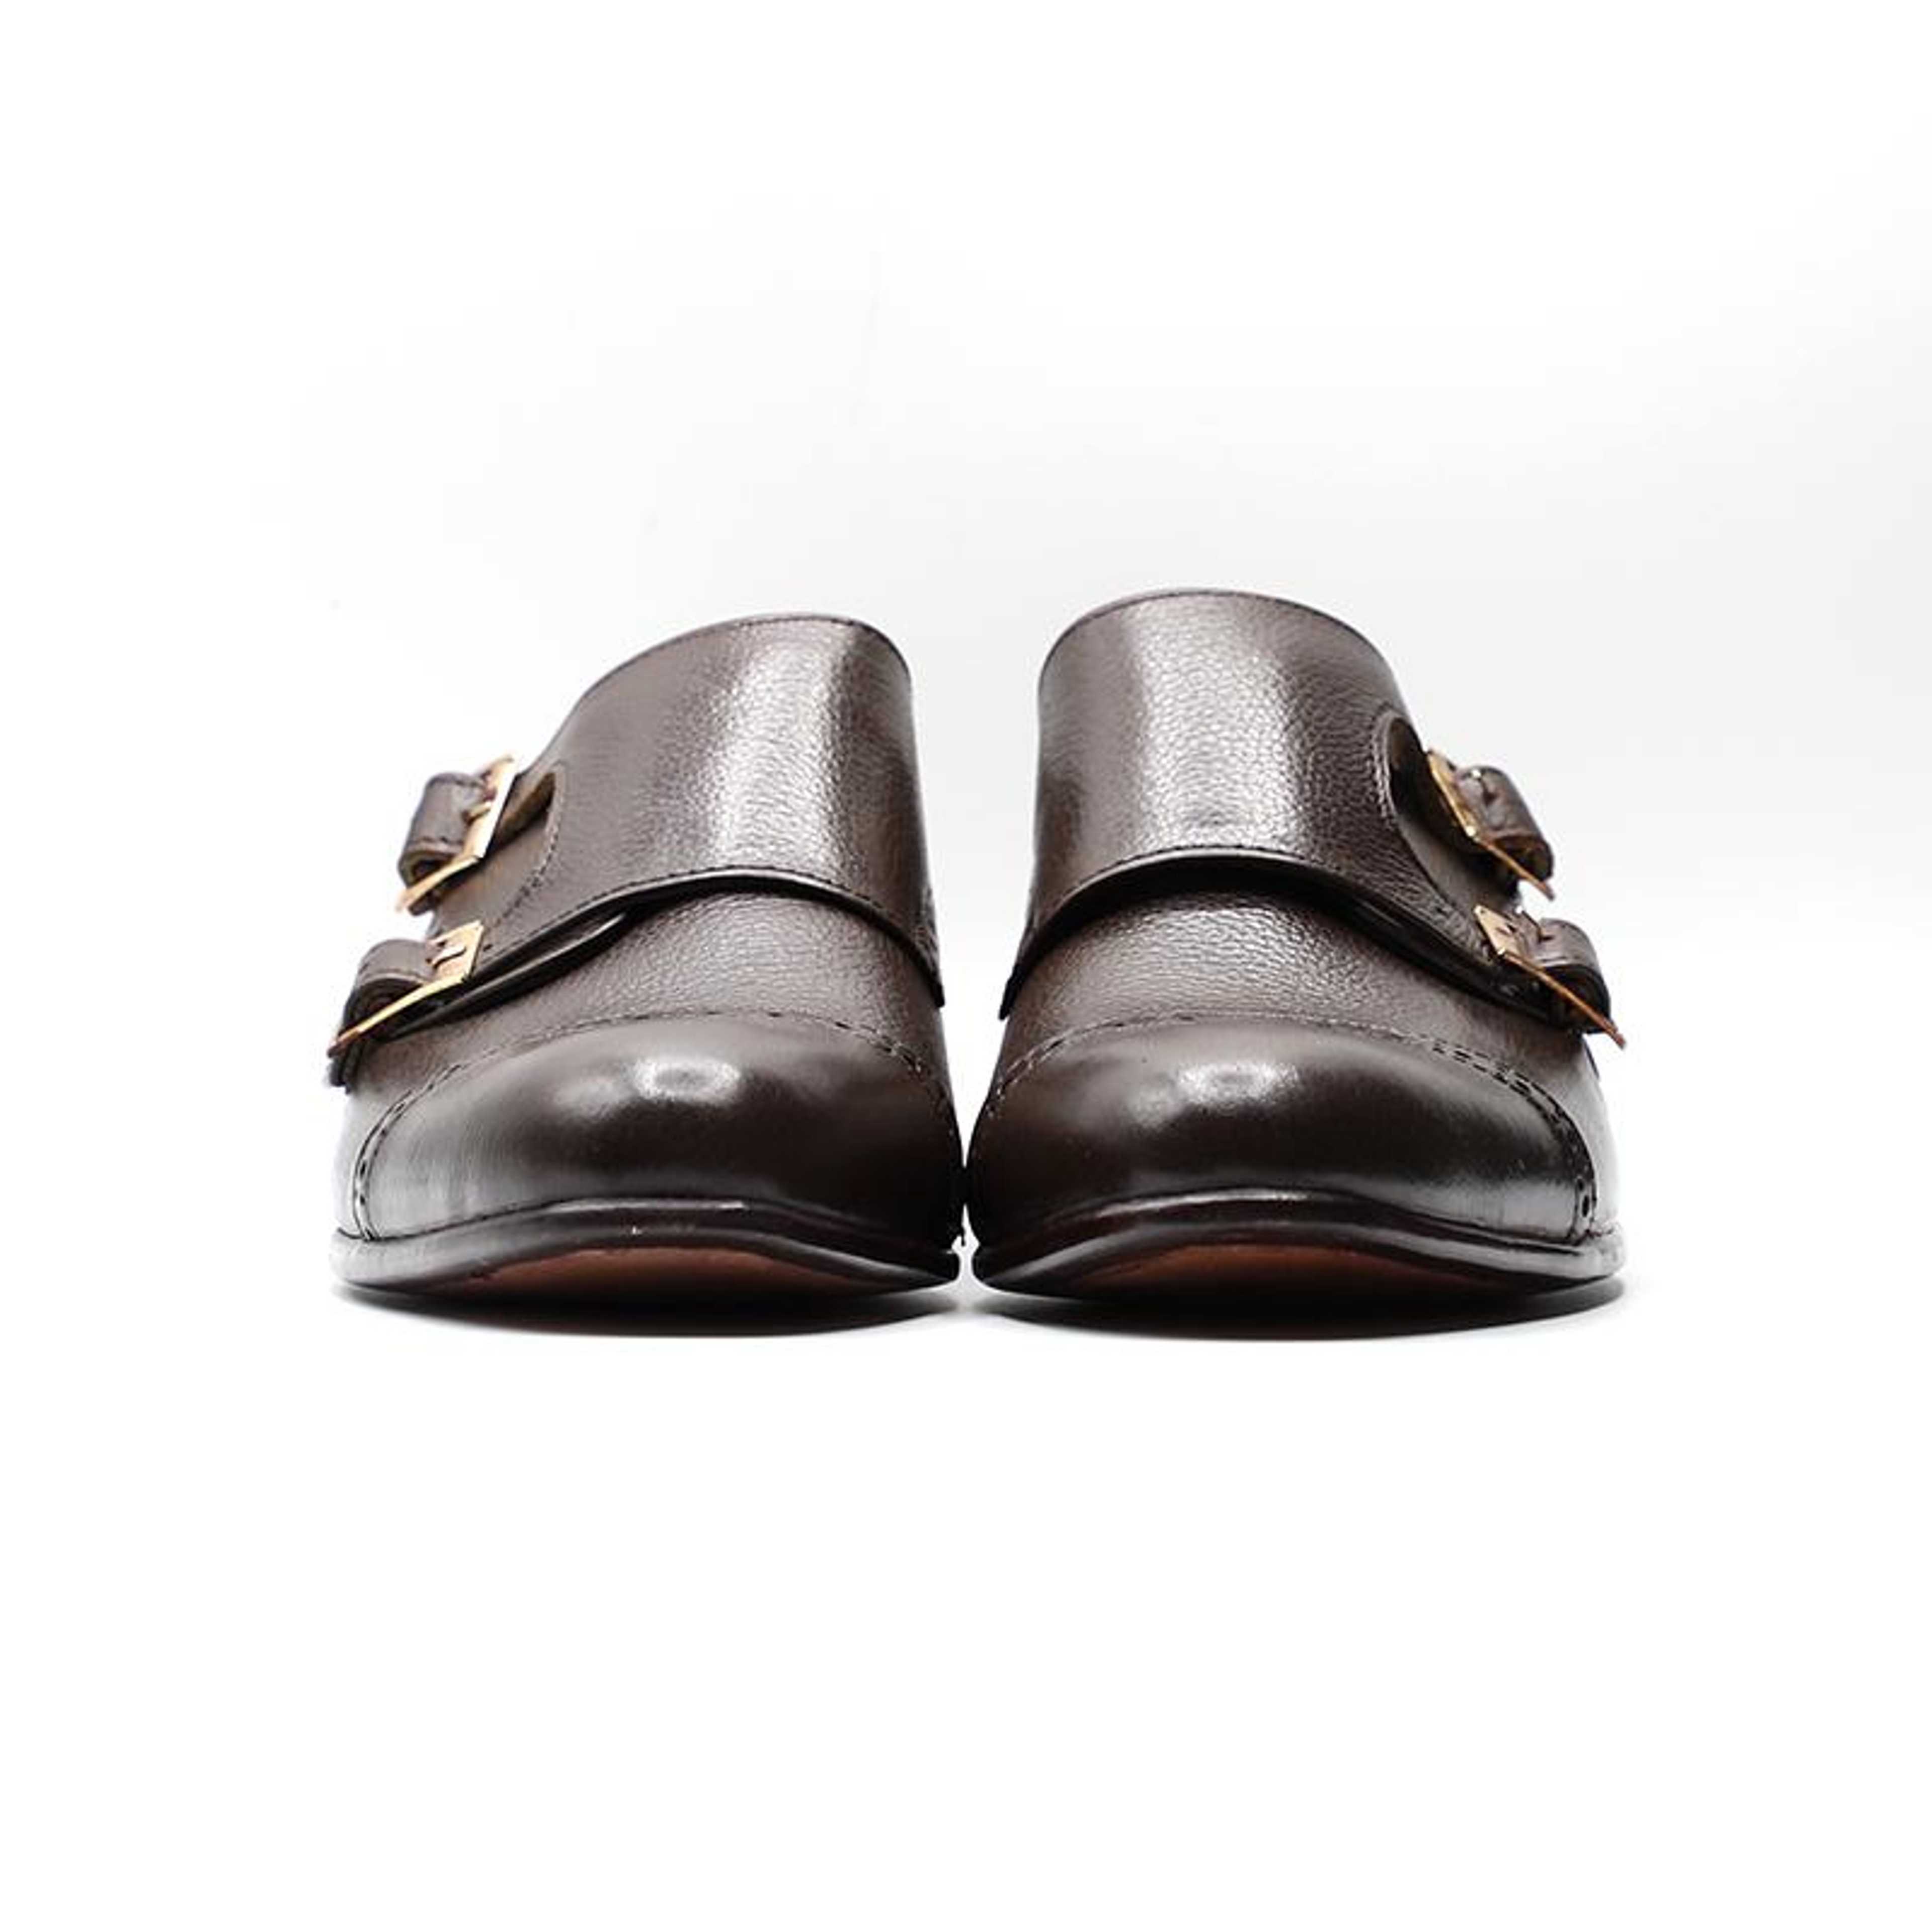 Handcrafted Calfskin Leather Shoes in Dark Brown Color (MNK001)